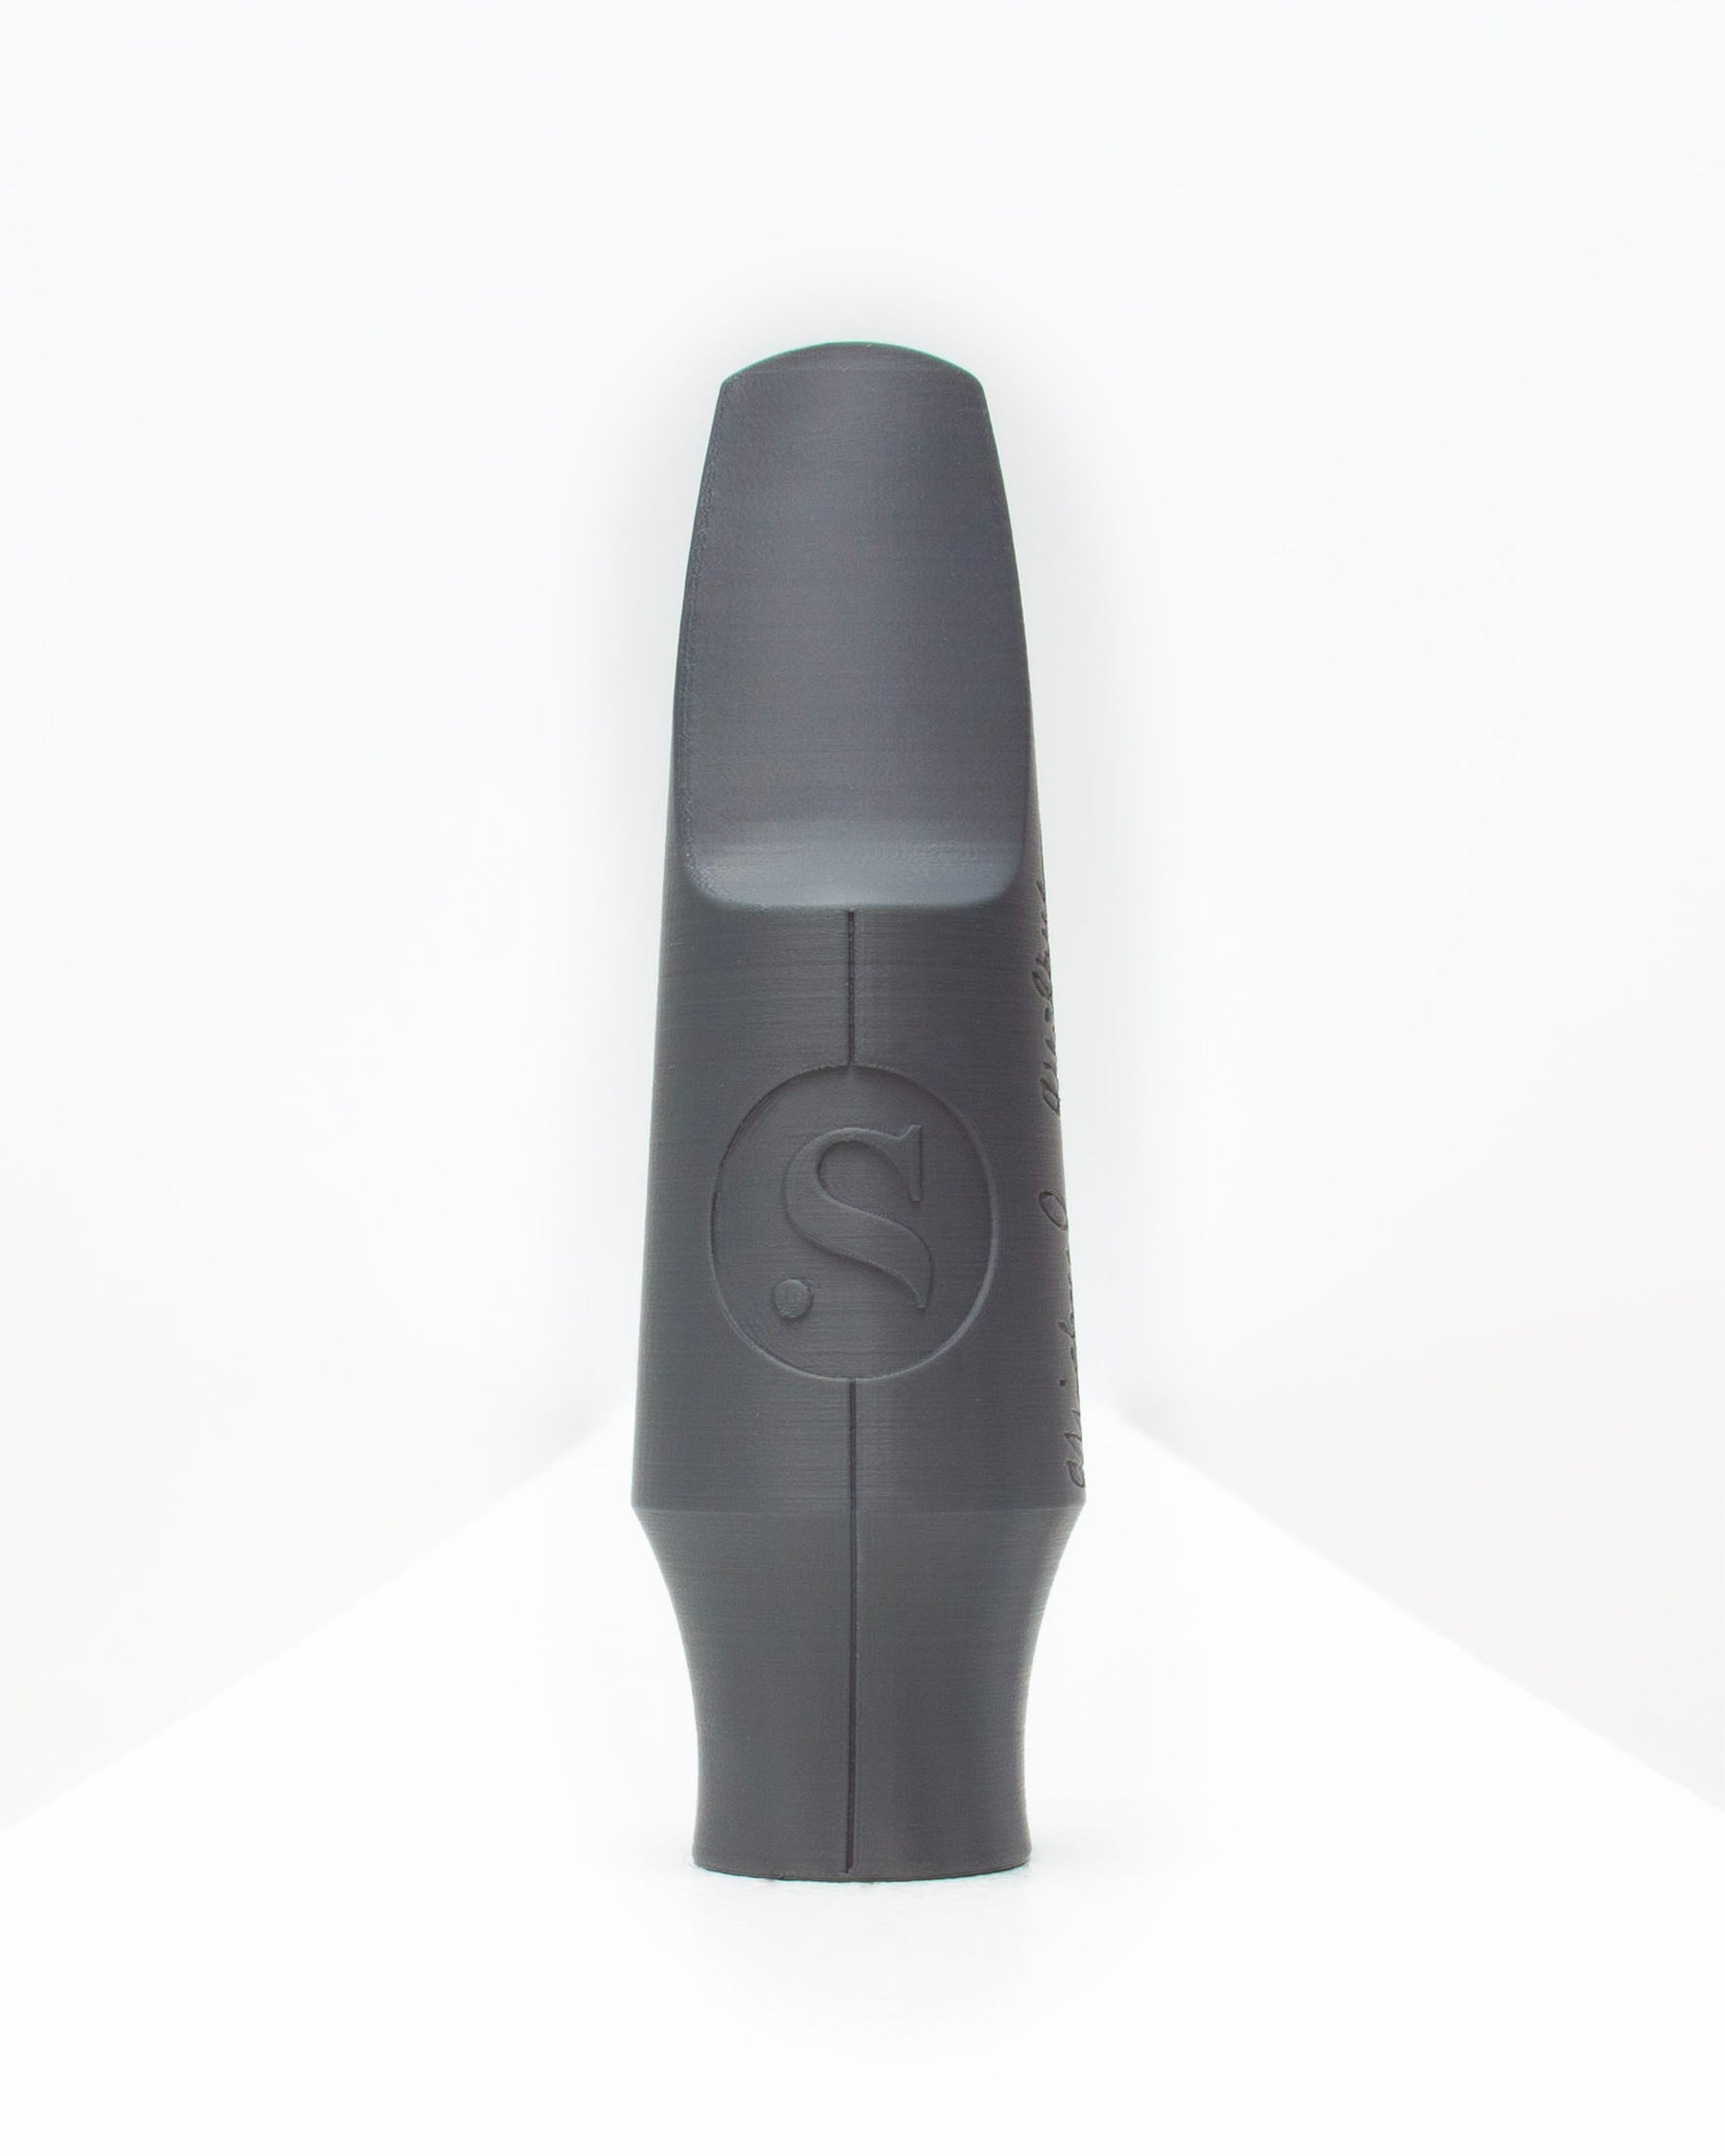 Tenor Signature Saxophone mouthpiece - Scott Paddock by Syos - 9 / Anthracite Metal